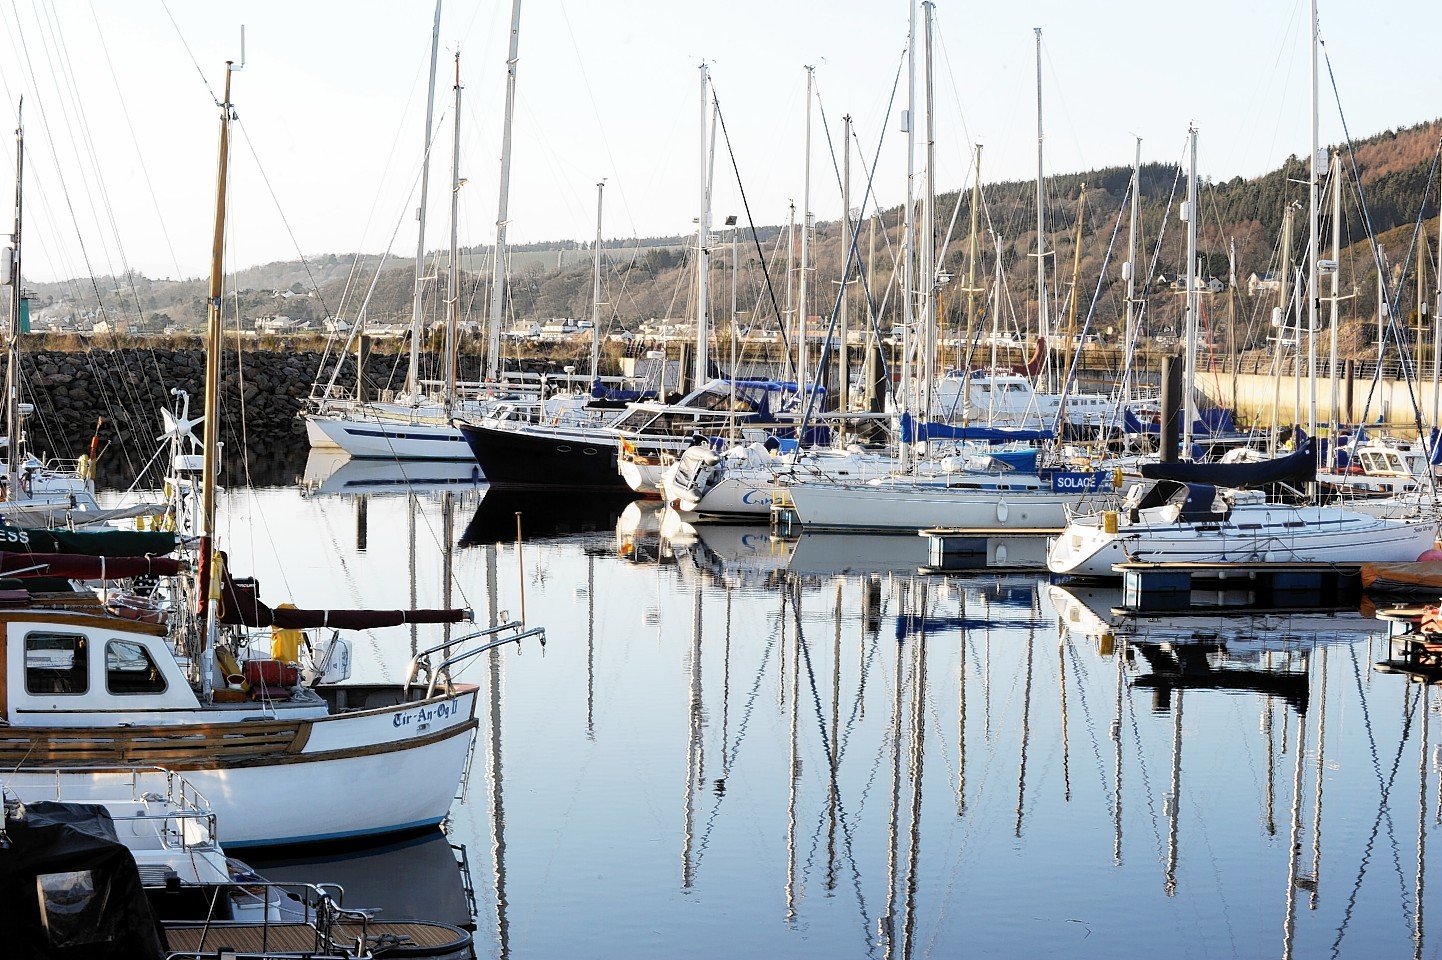 A man is in hospital after falling into the water at Inverness Marina.